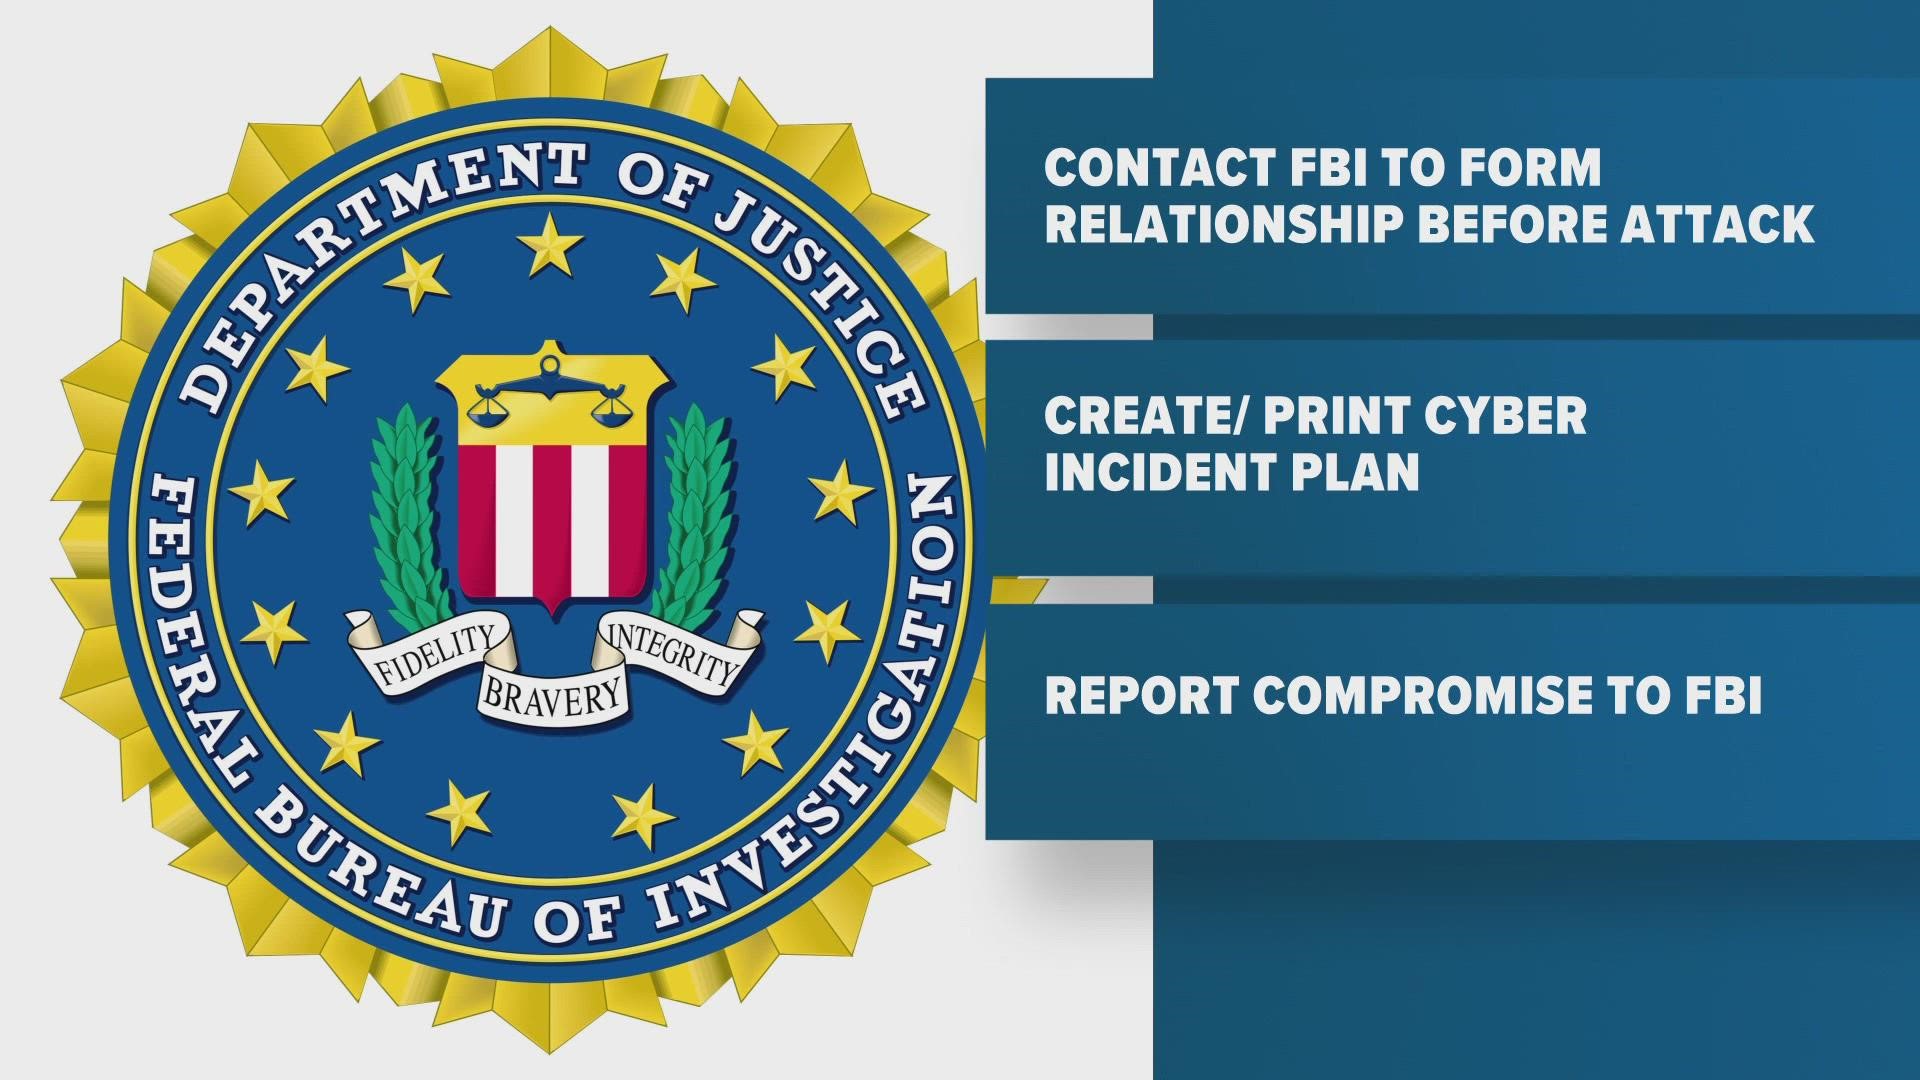 FBI warns cyber crime could be a major concern for national security